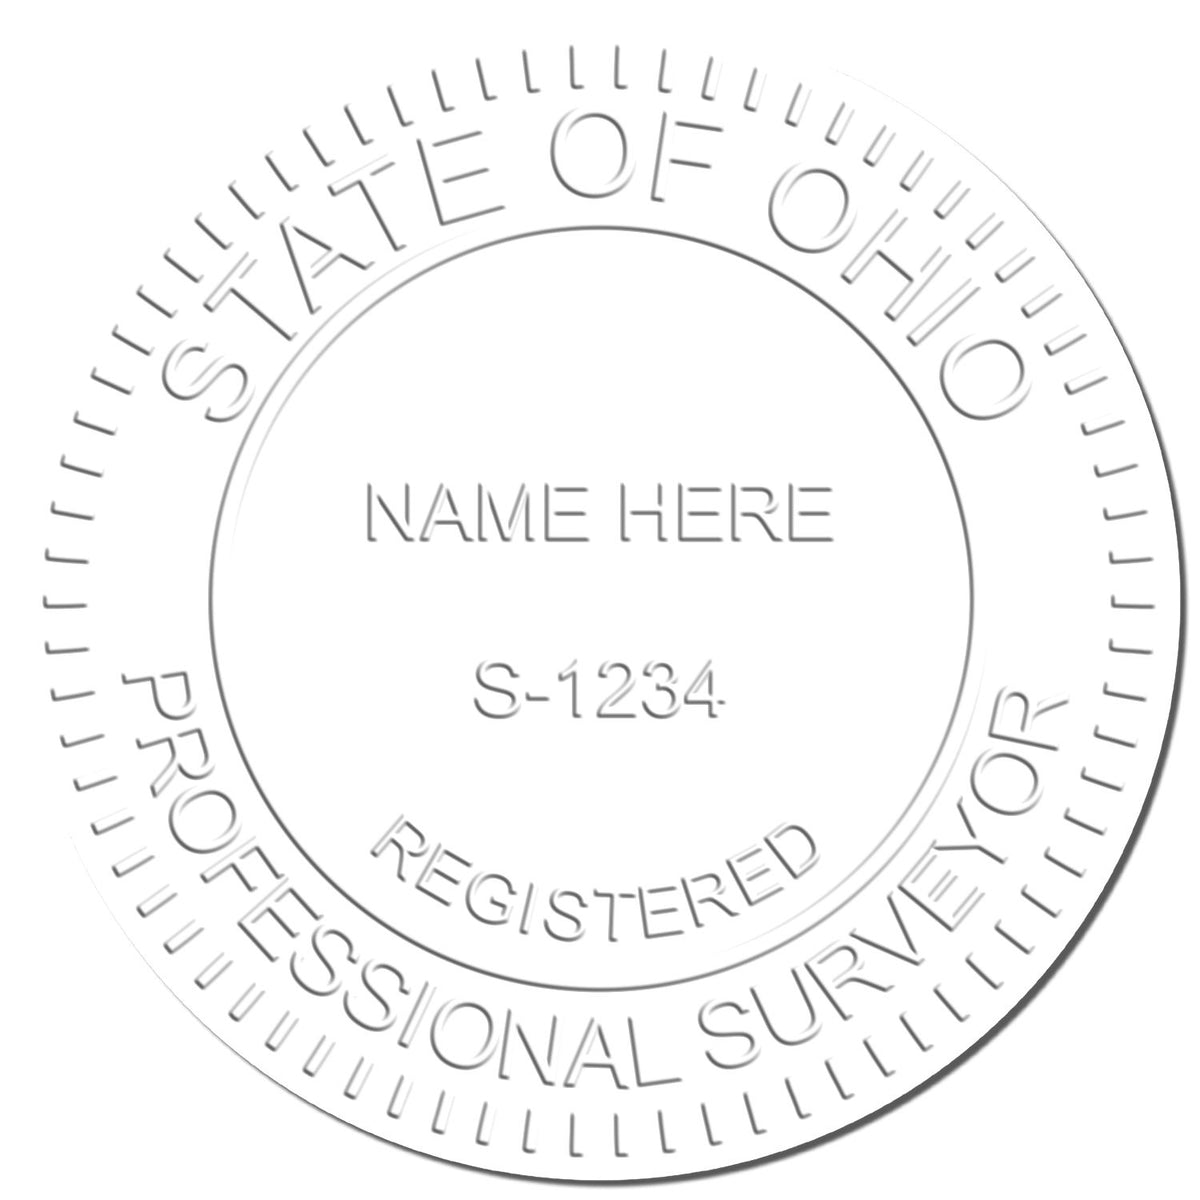 This paper is stamped with a sample imprint of the Gift Ohio Land Surveyor Seal, signifying its quality and reliability.